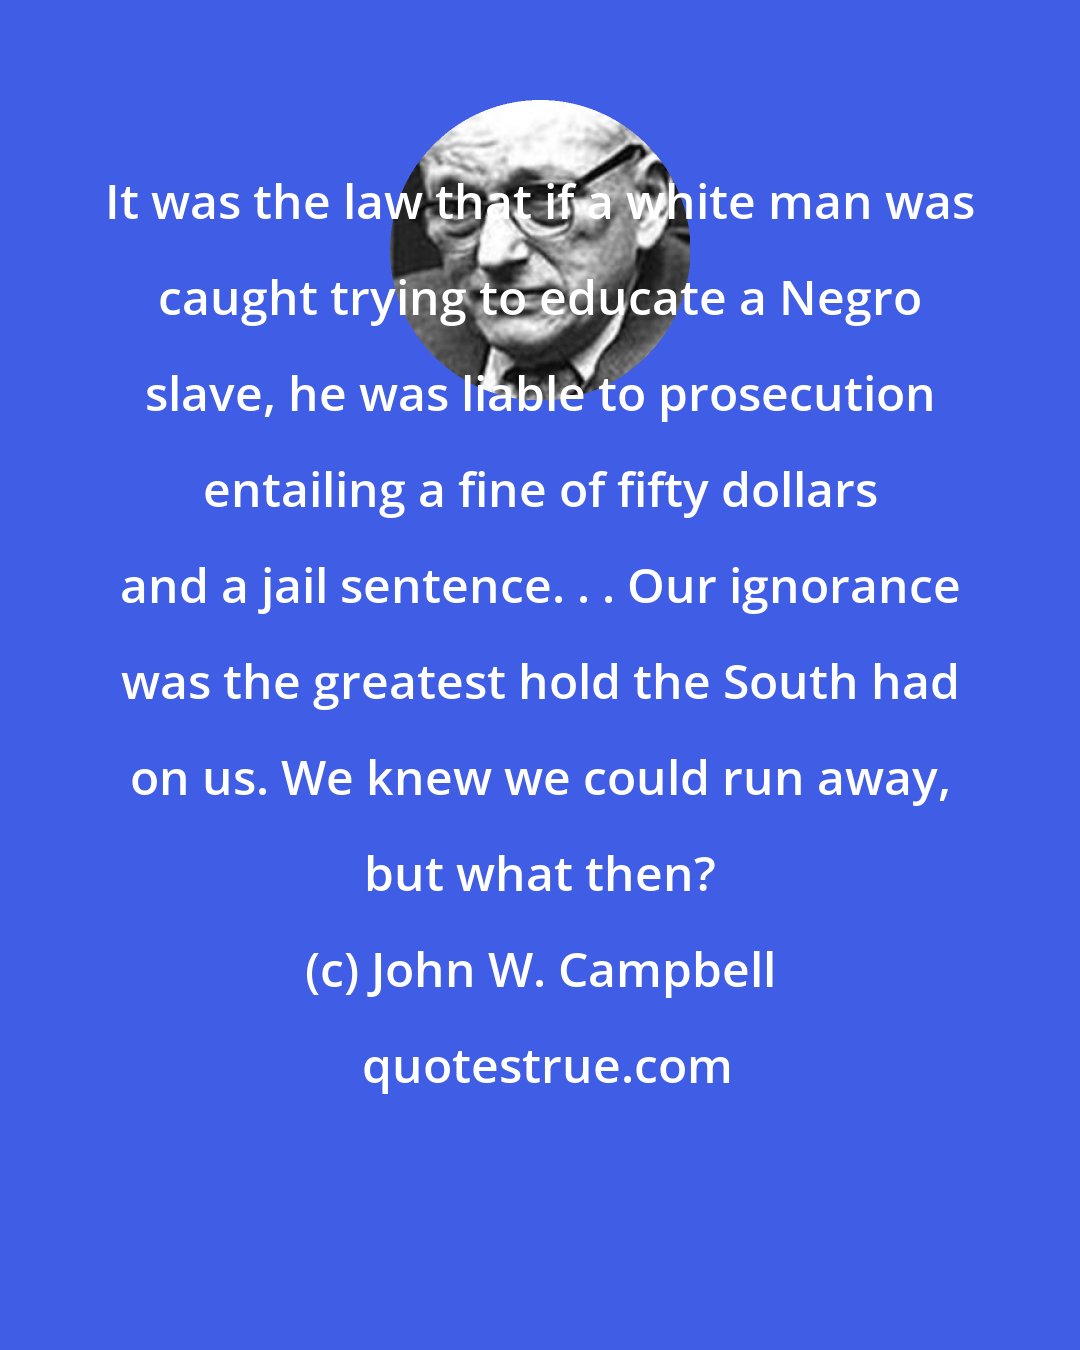 John W. Campbell: It was the law that if a white man was caught trying to educate a Negro slave, he was liable to prosecution entailing a fine of fifty dollars and a jail sentence. . . Our ignorance was the greatest hold the South had on us. We knew we could run away, but what then?